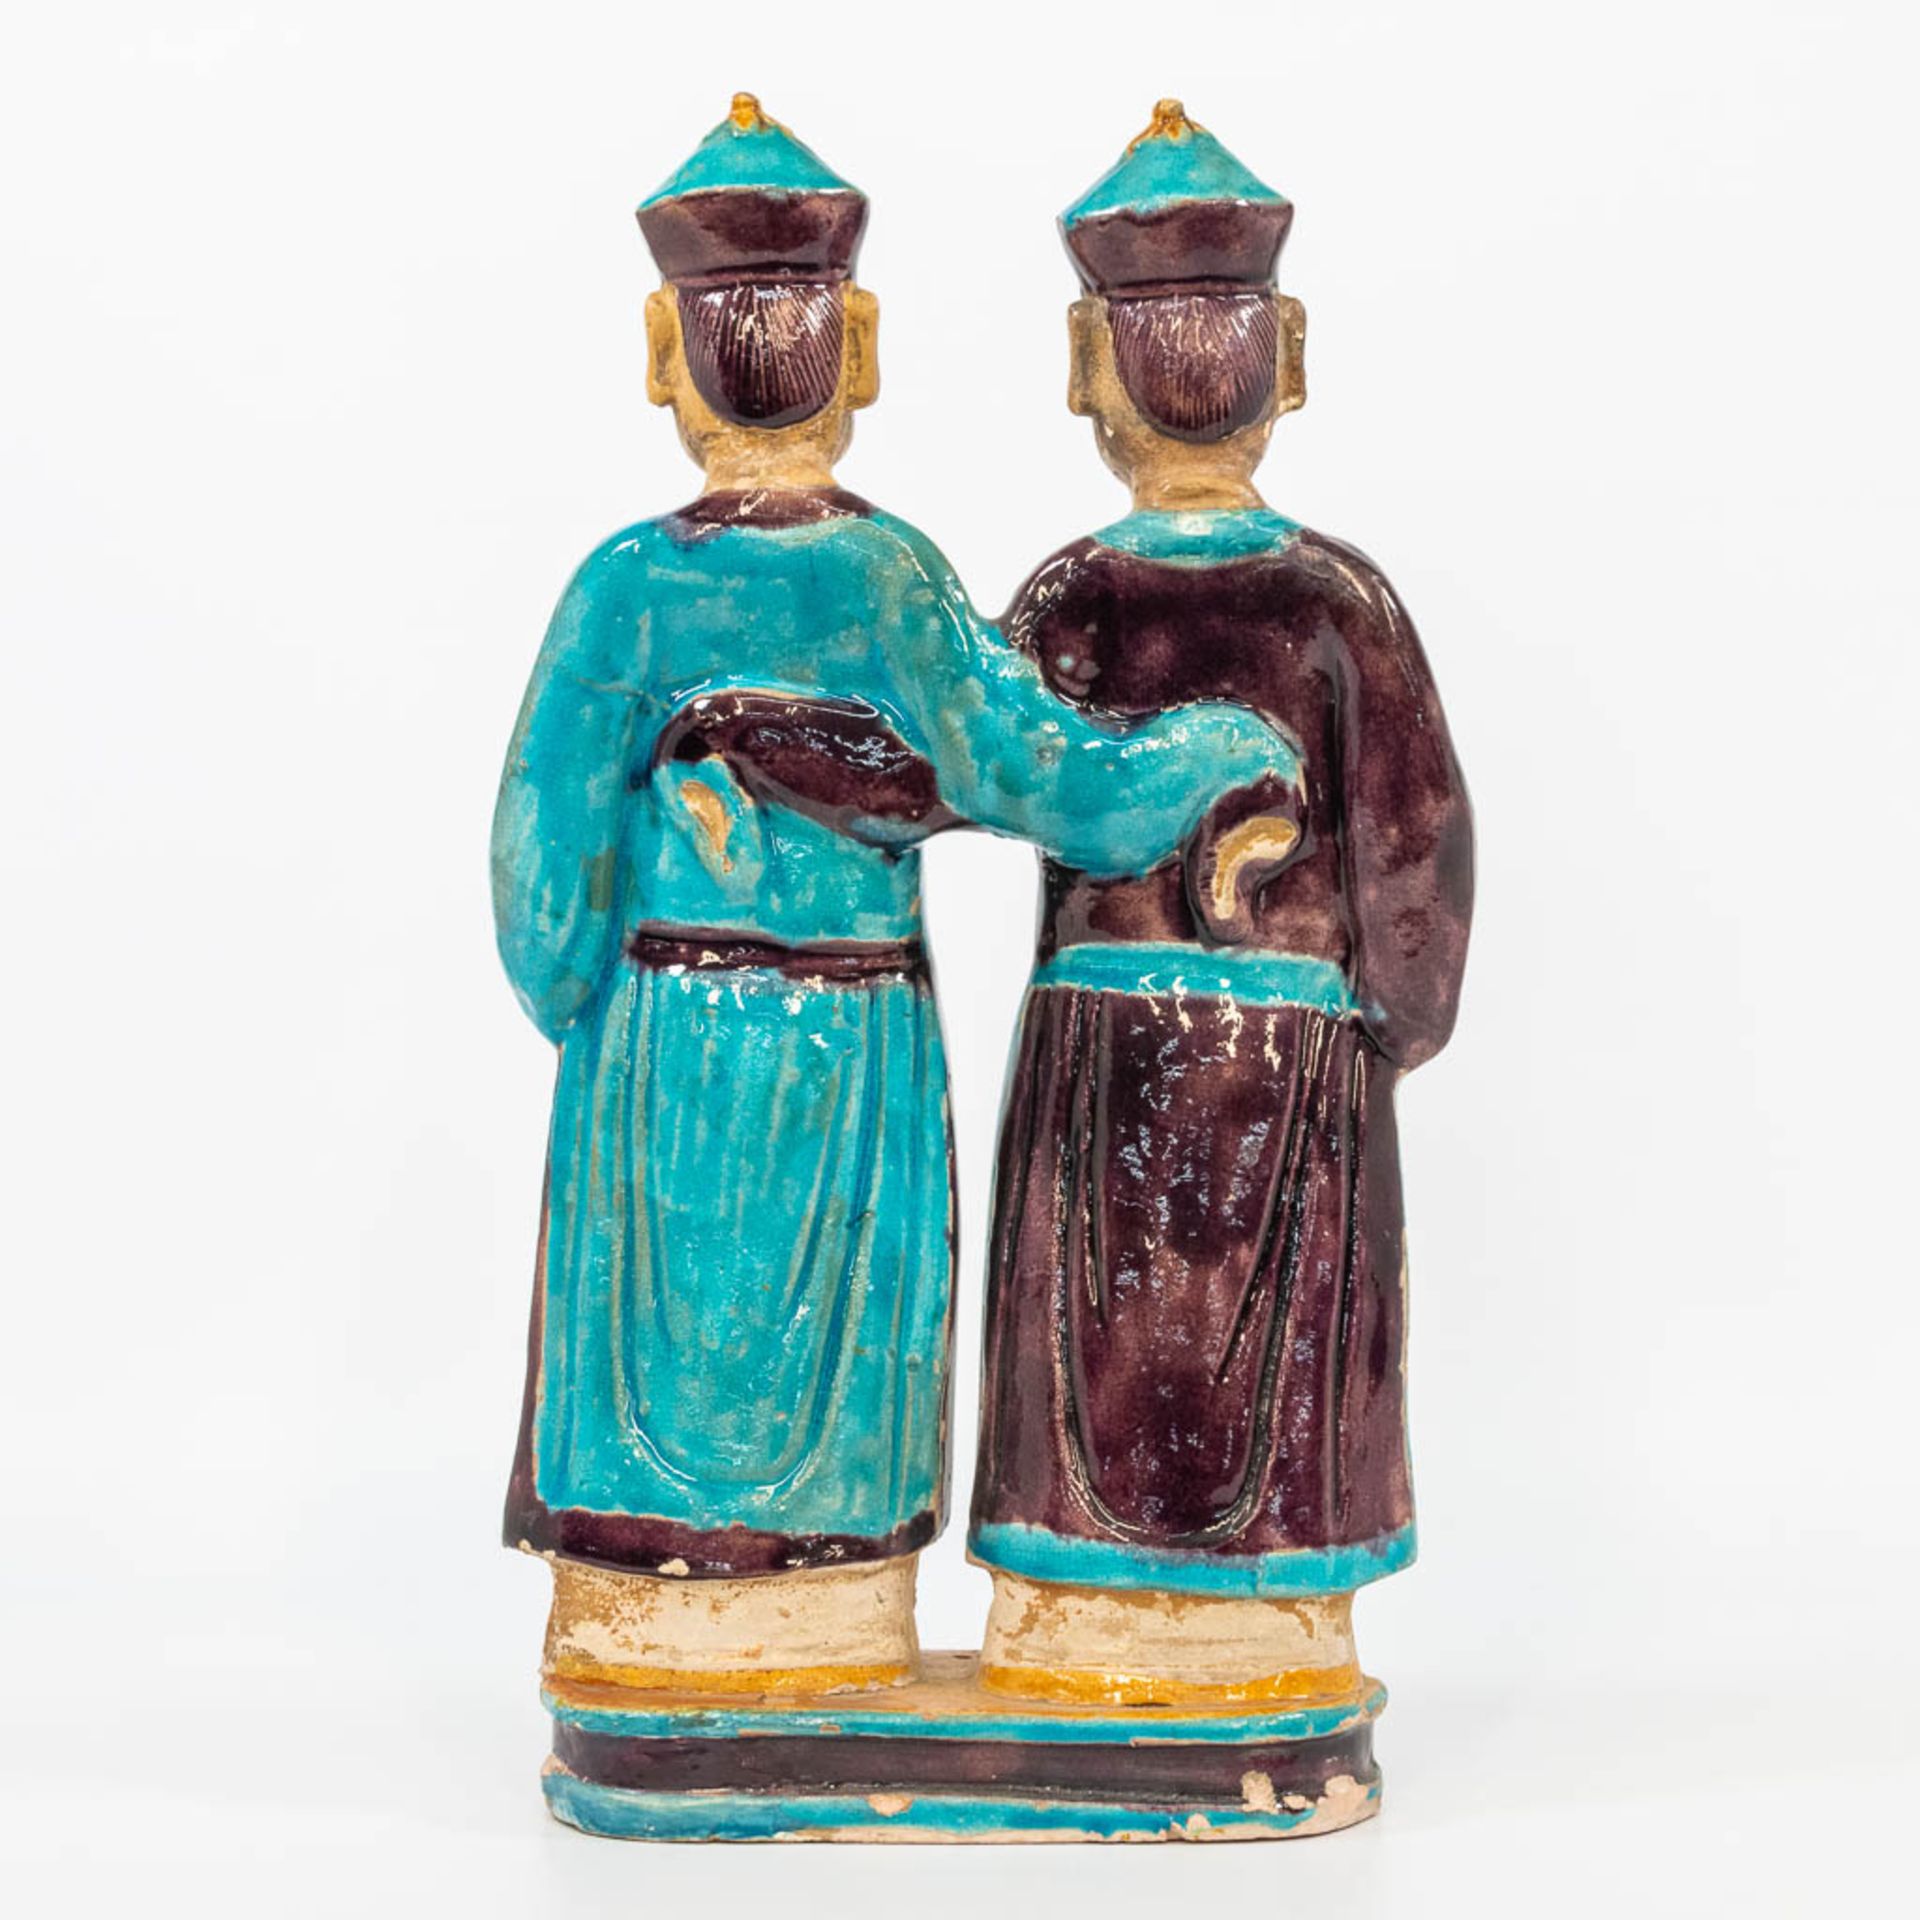 A statue made of glazed earthenware, a pair of Easern figurines. (8,5 x 24 x 41 cm) - Bild 7 aus 16